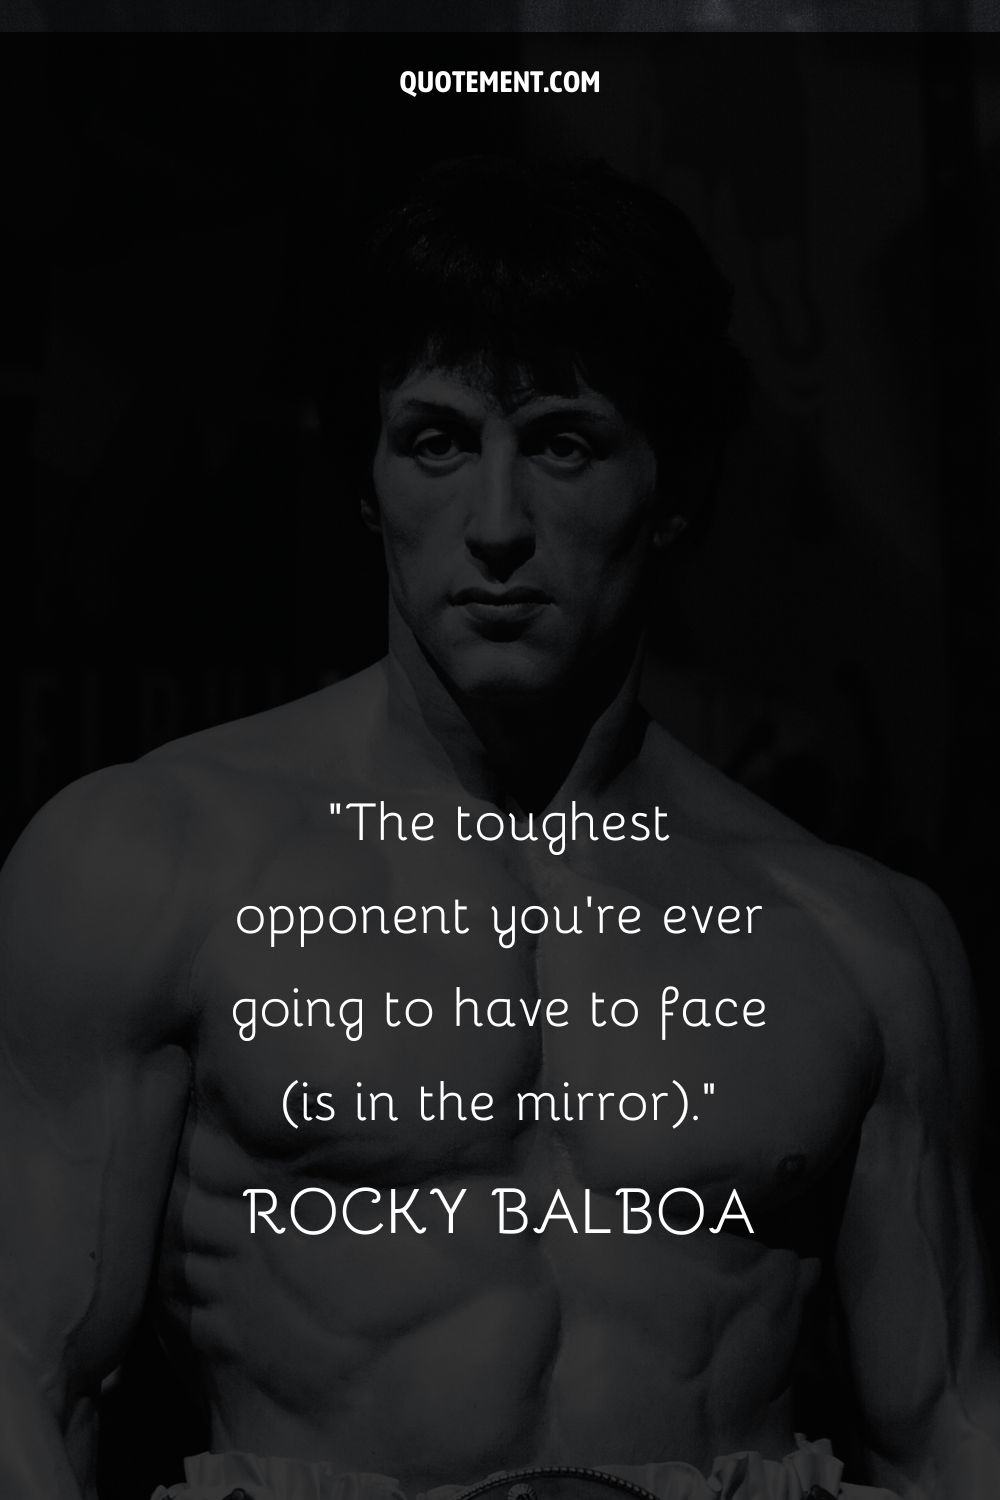 The toughest opponent you’re ever going to have to face (is in the mirror)